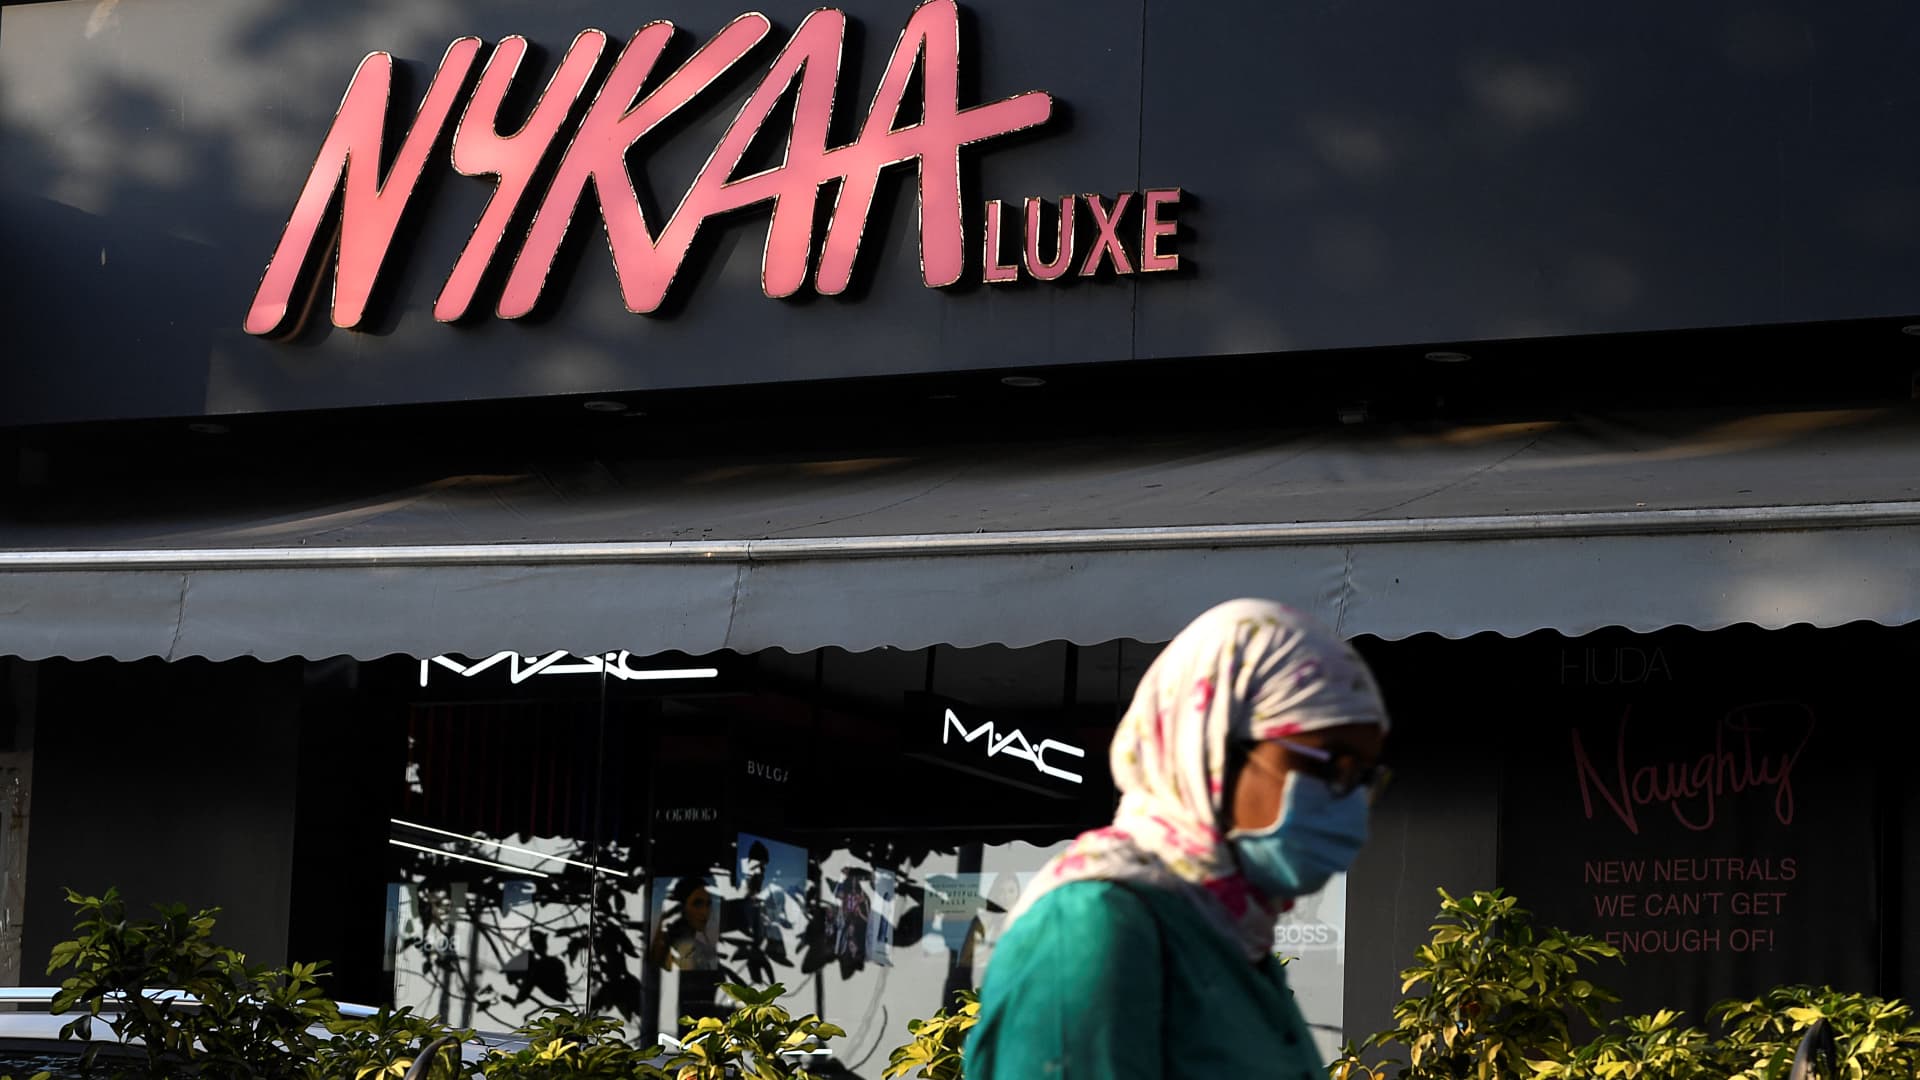 Indian beauty company Nykaa looks to physical retail expansion